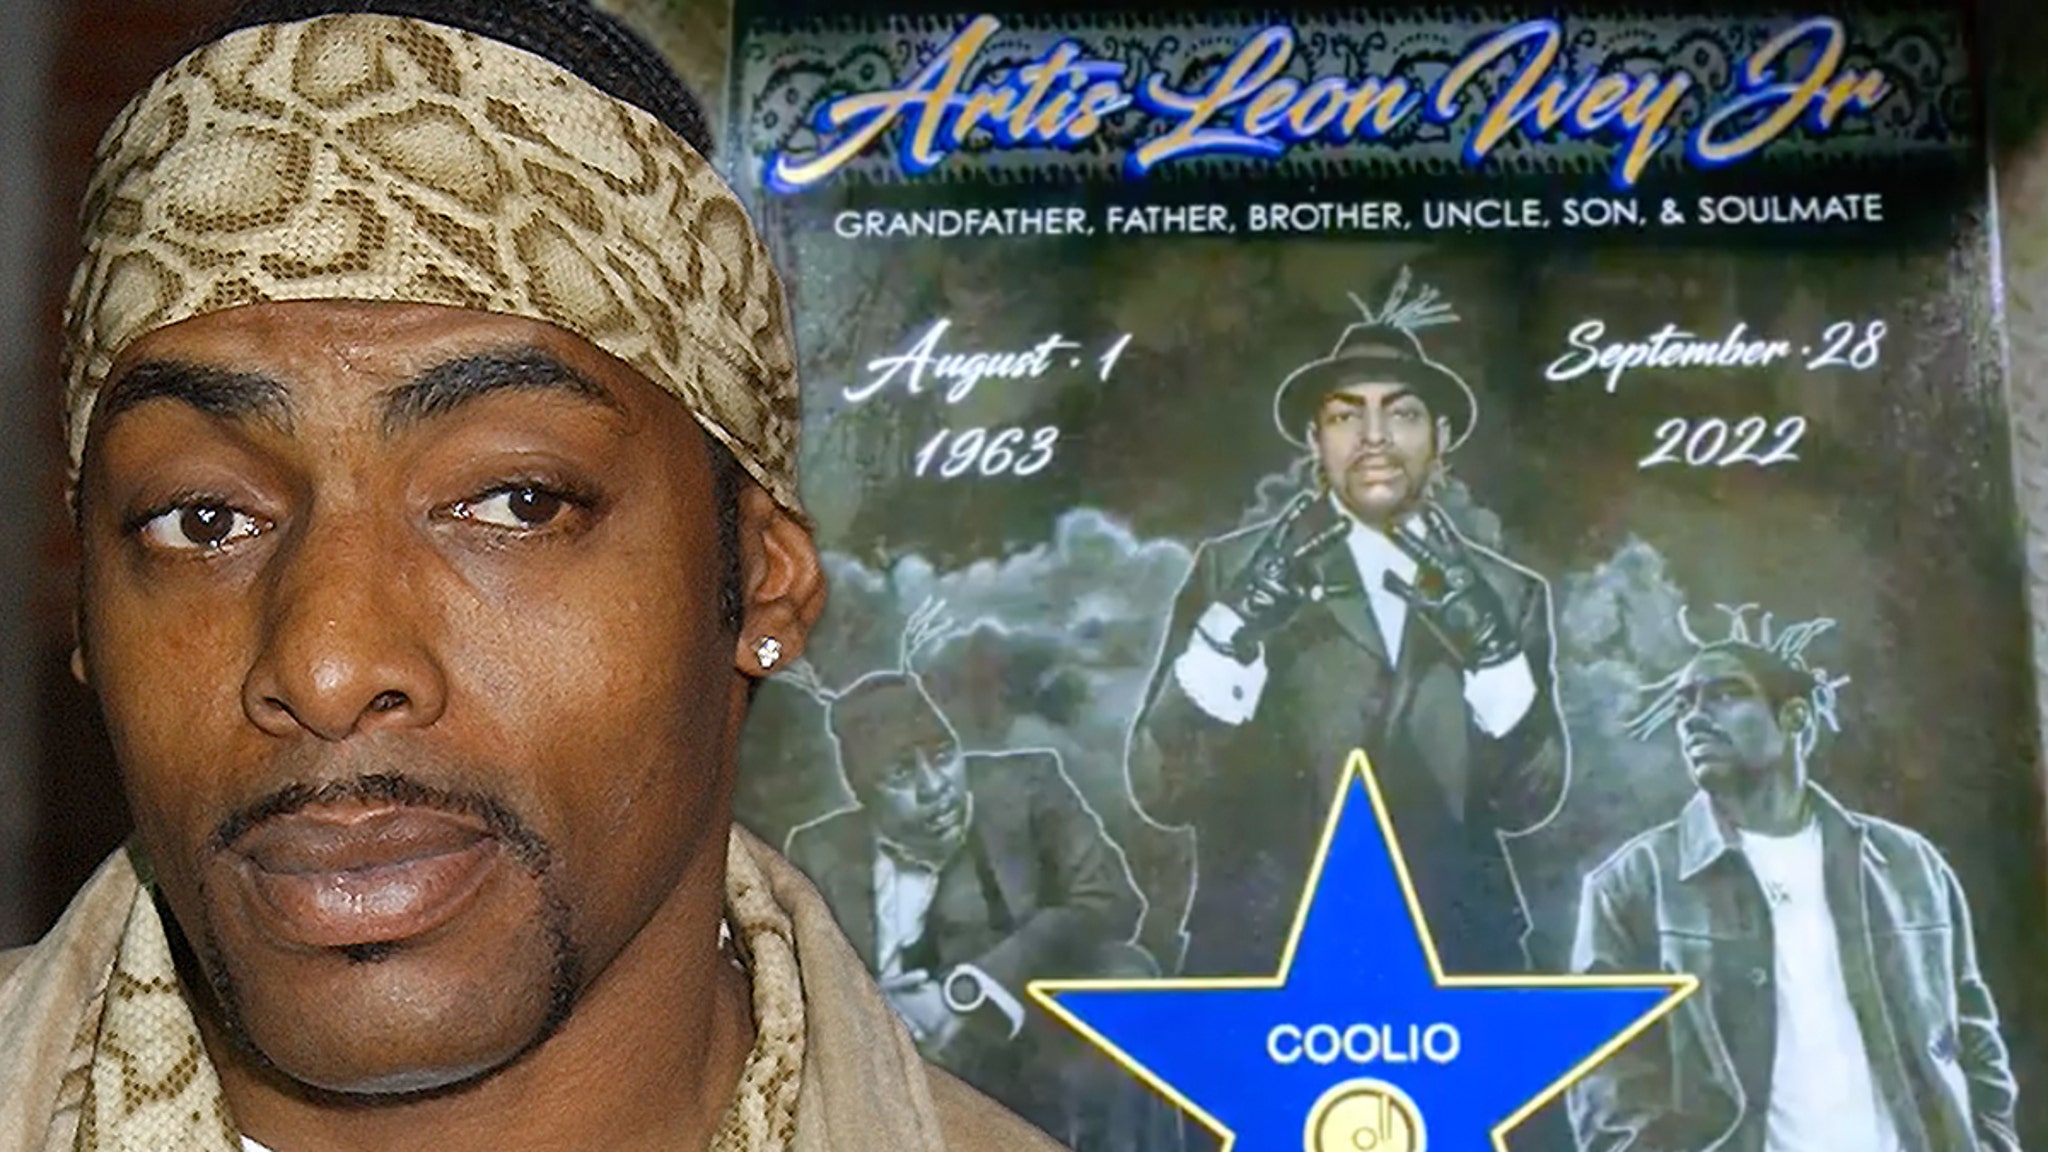 Coolio's Family Gets Headstone For Late Rapper